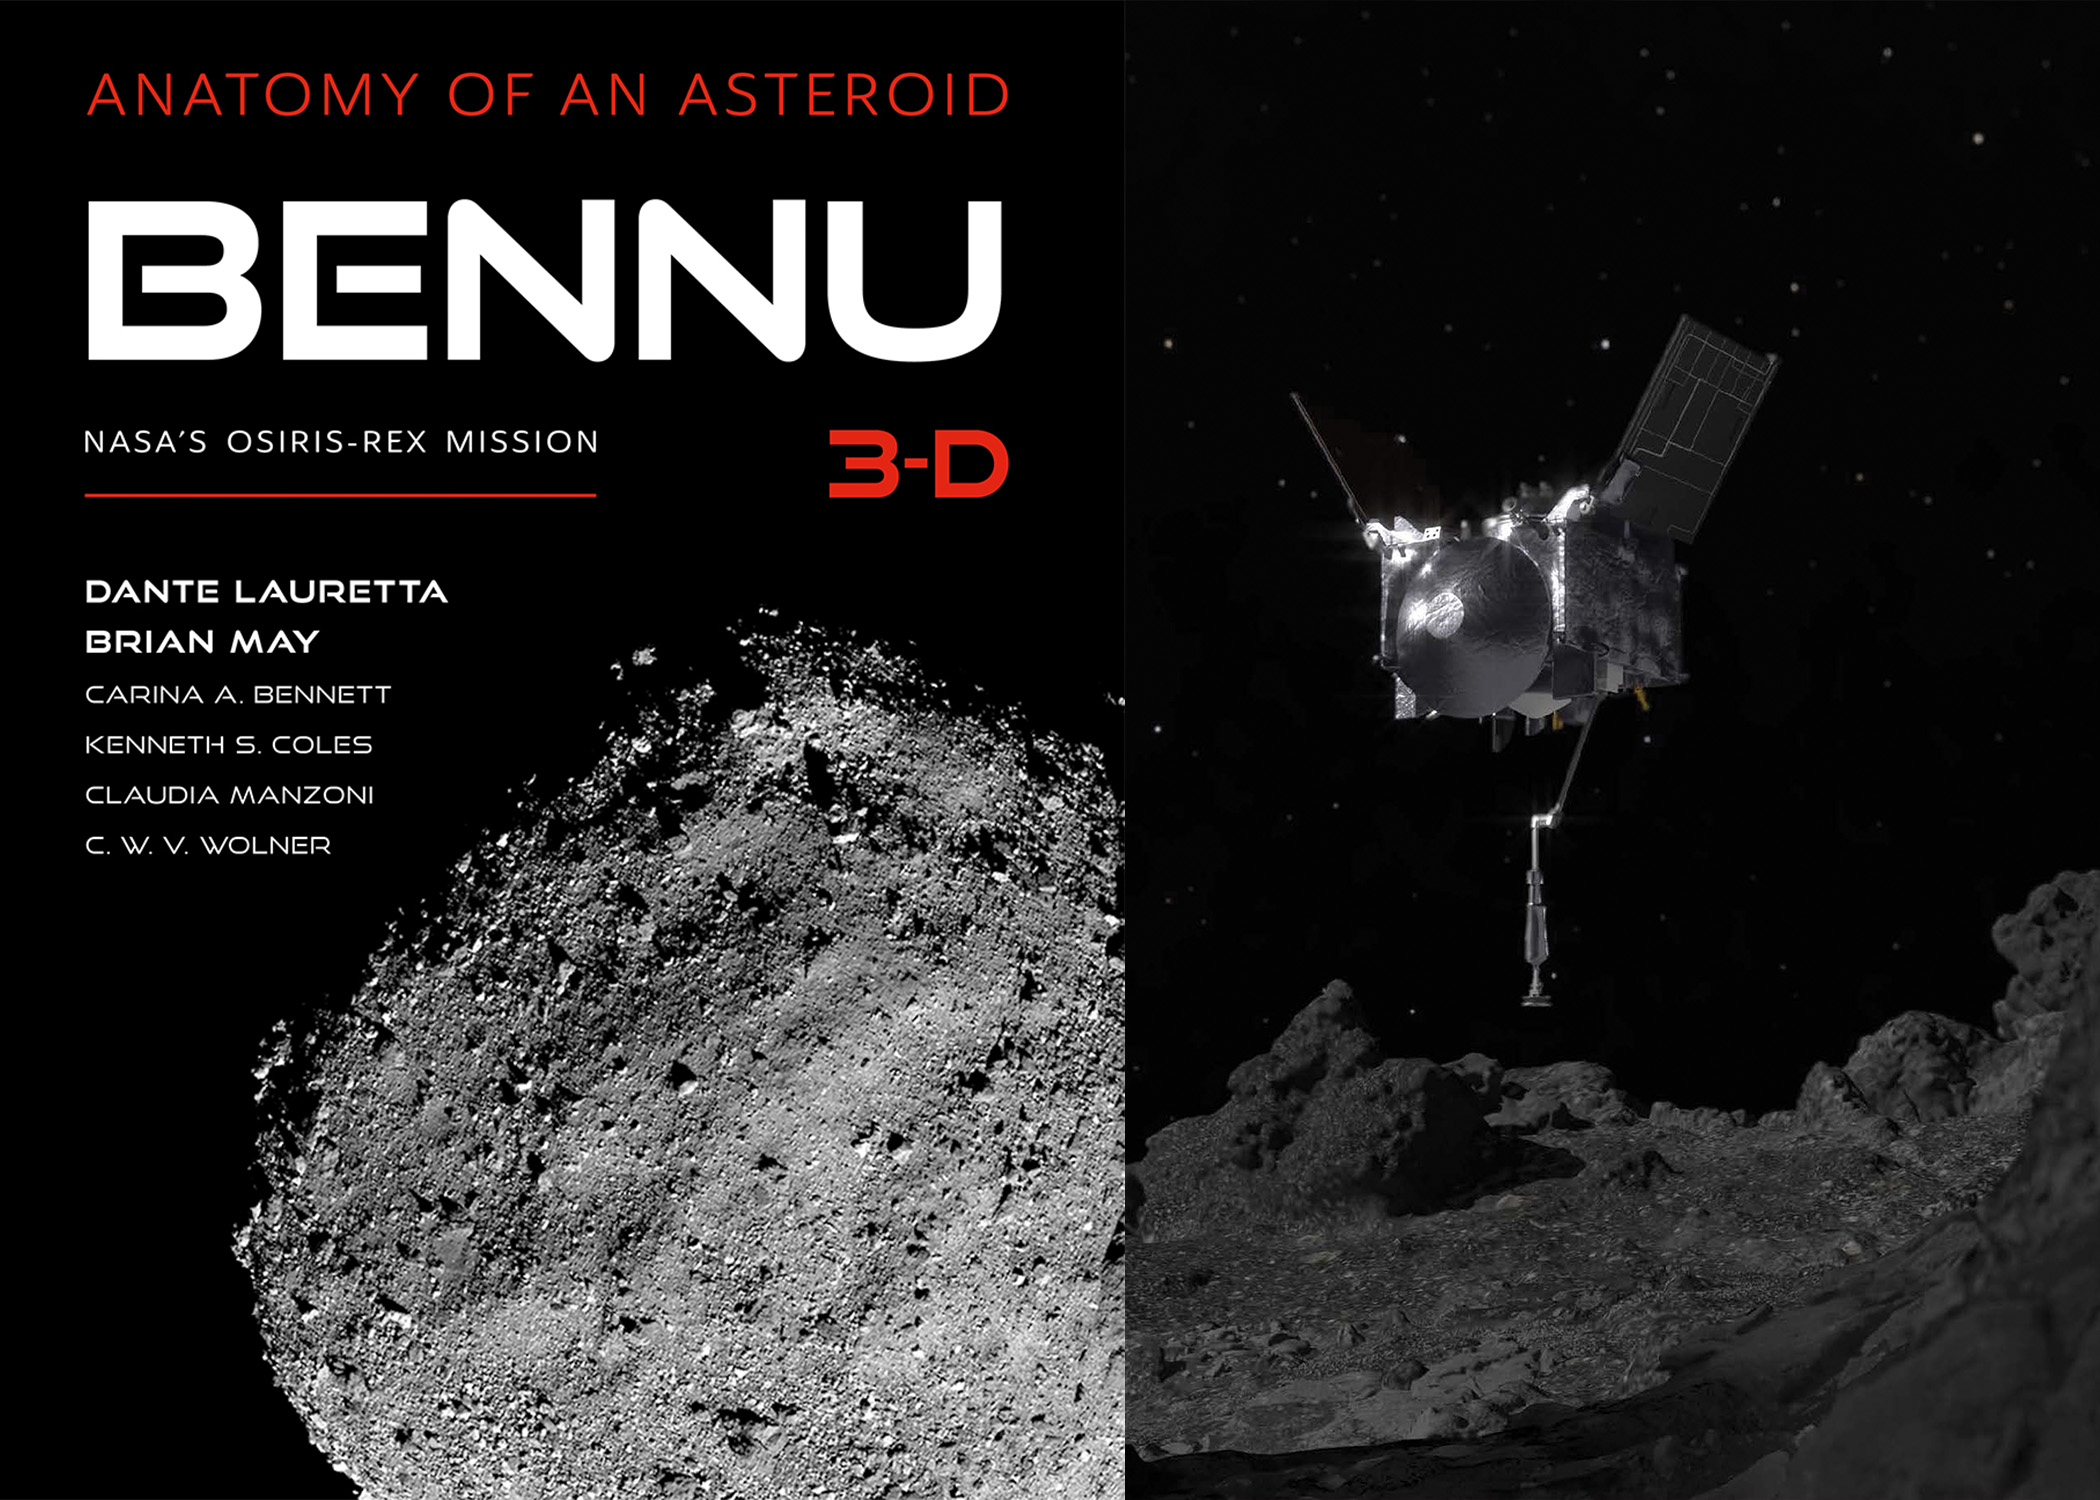 Bennu 3-D cover and OSIRIS-REx hovering above Bennu asteroid